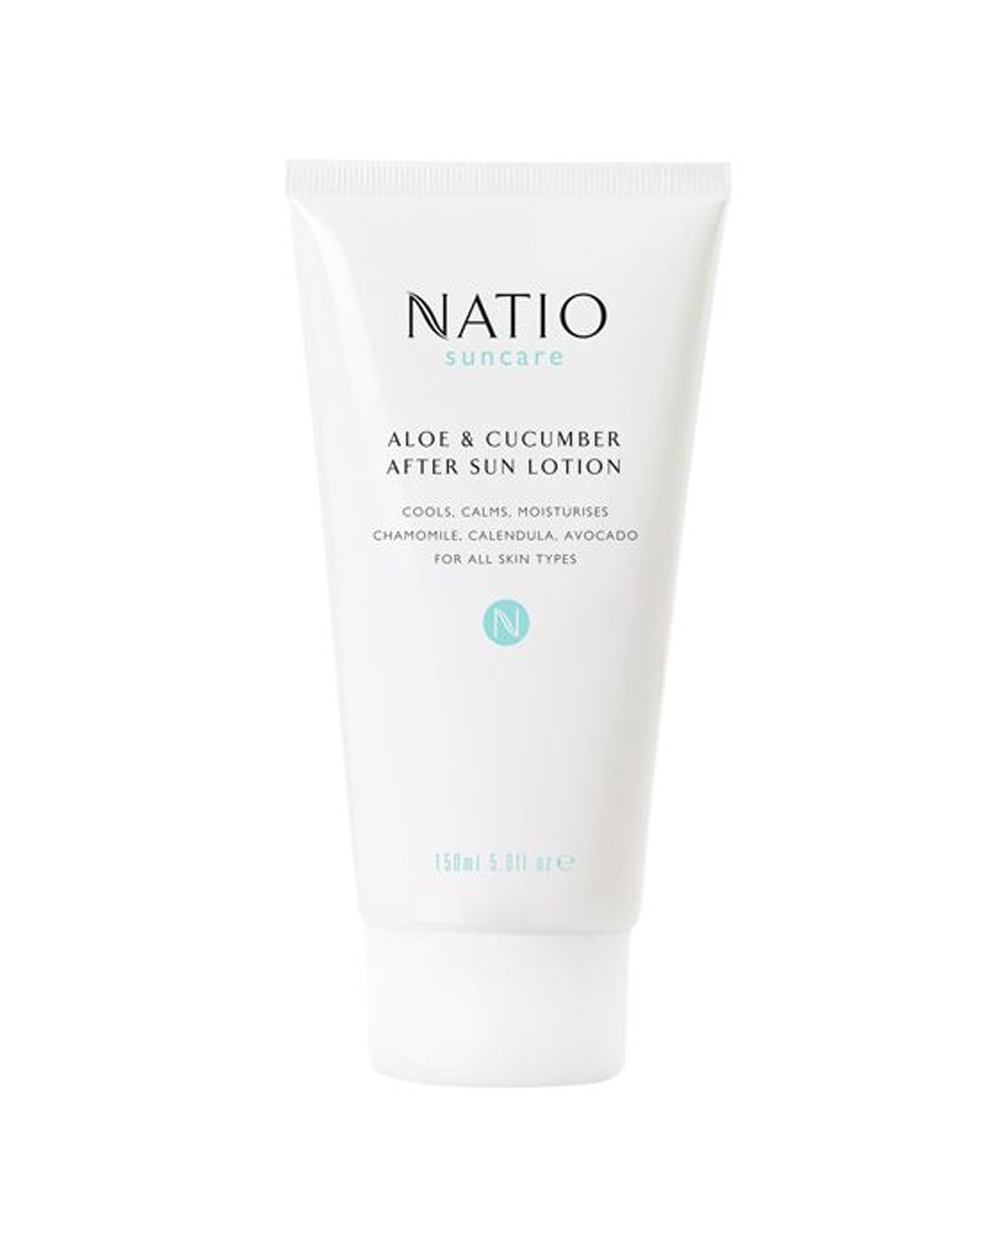 Natio Aloe & Cucumber After Sun Lotion, $17 from Farmers